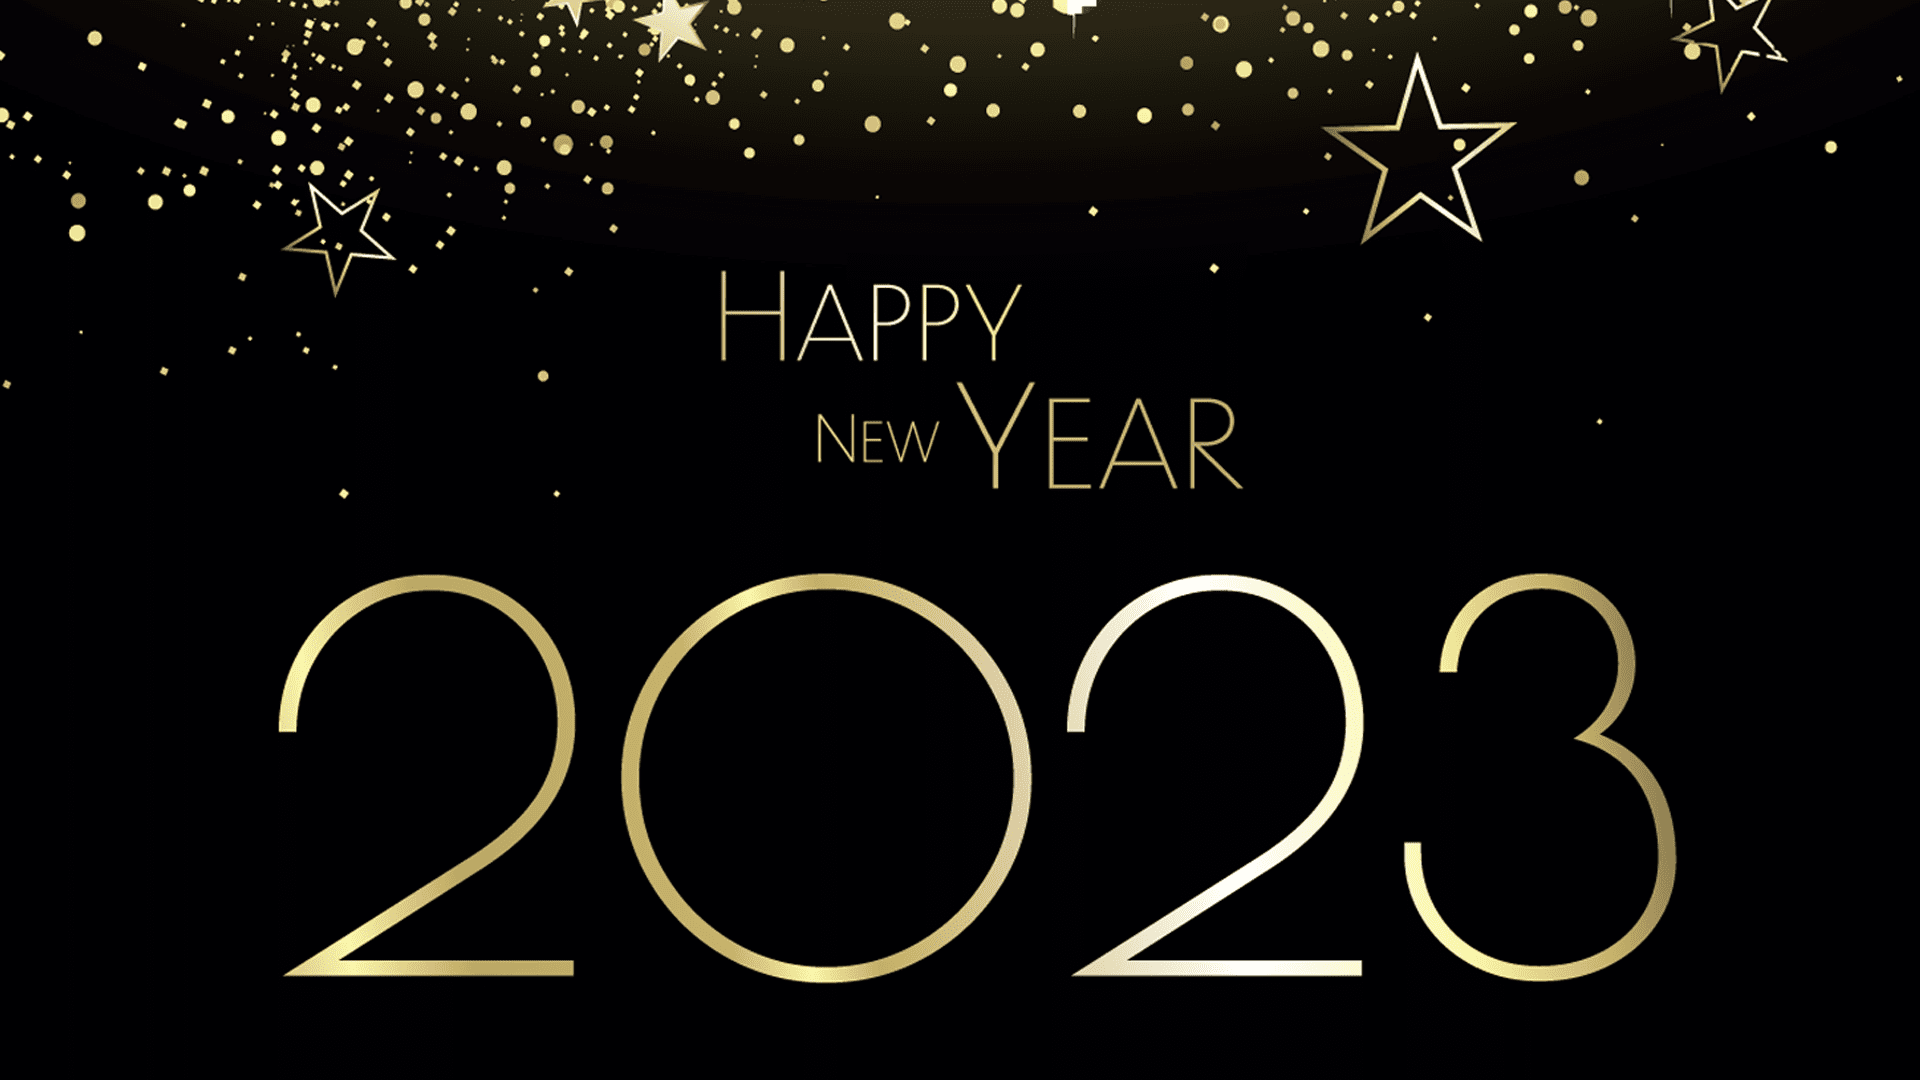 Our offices are closed on 12/30/2022 and 1/2/2023 for New Years